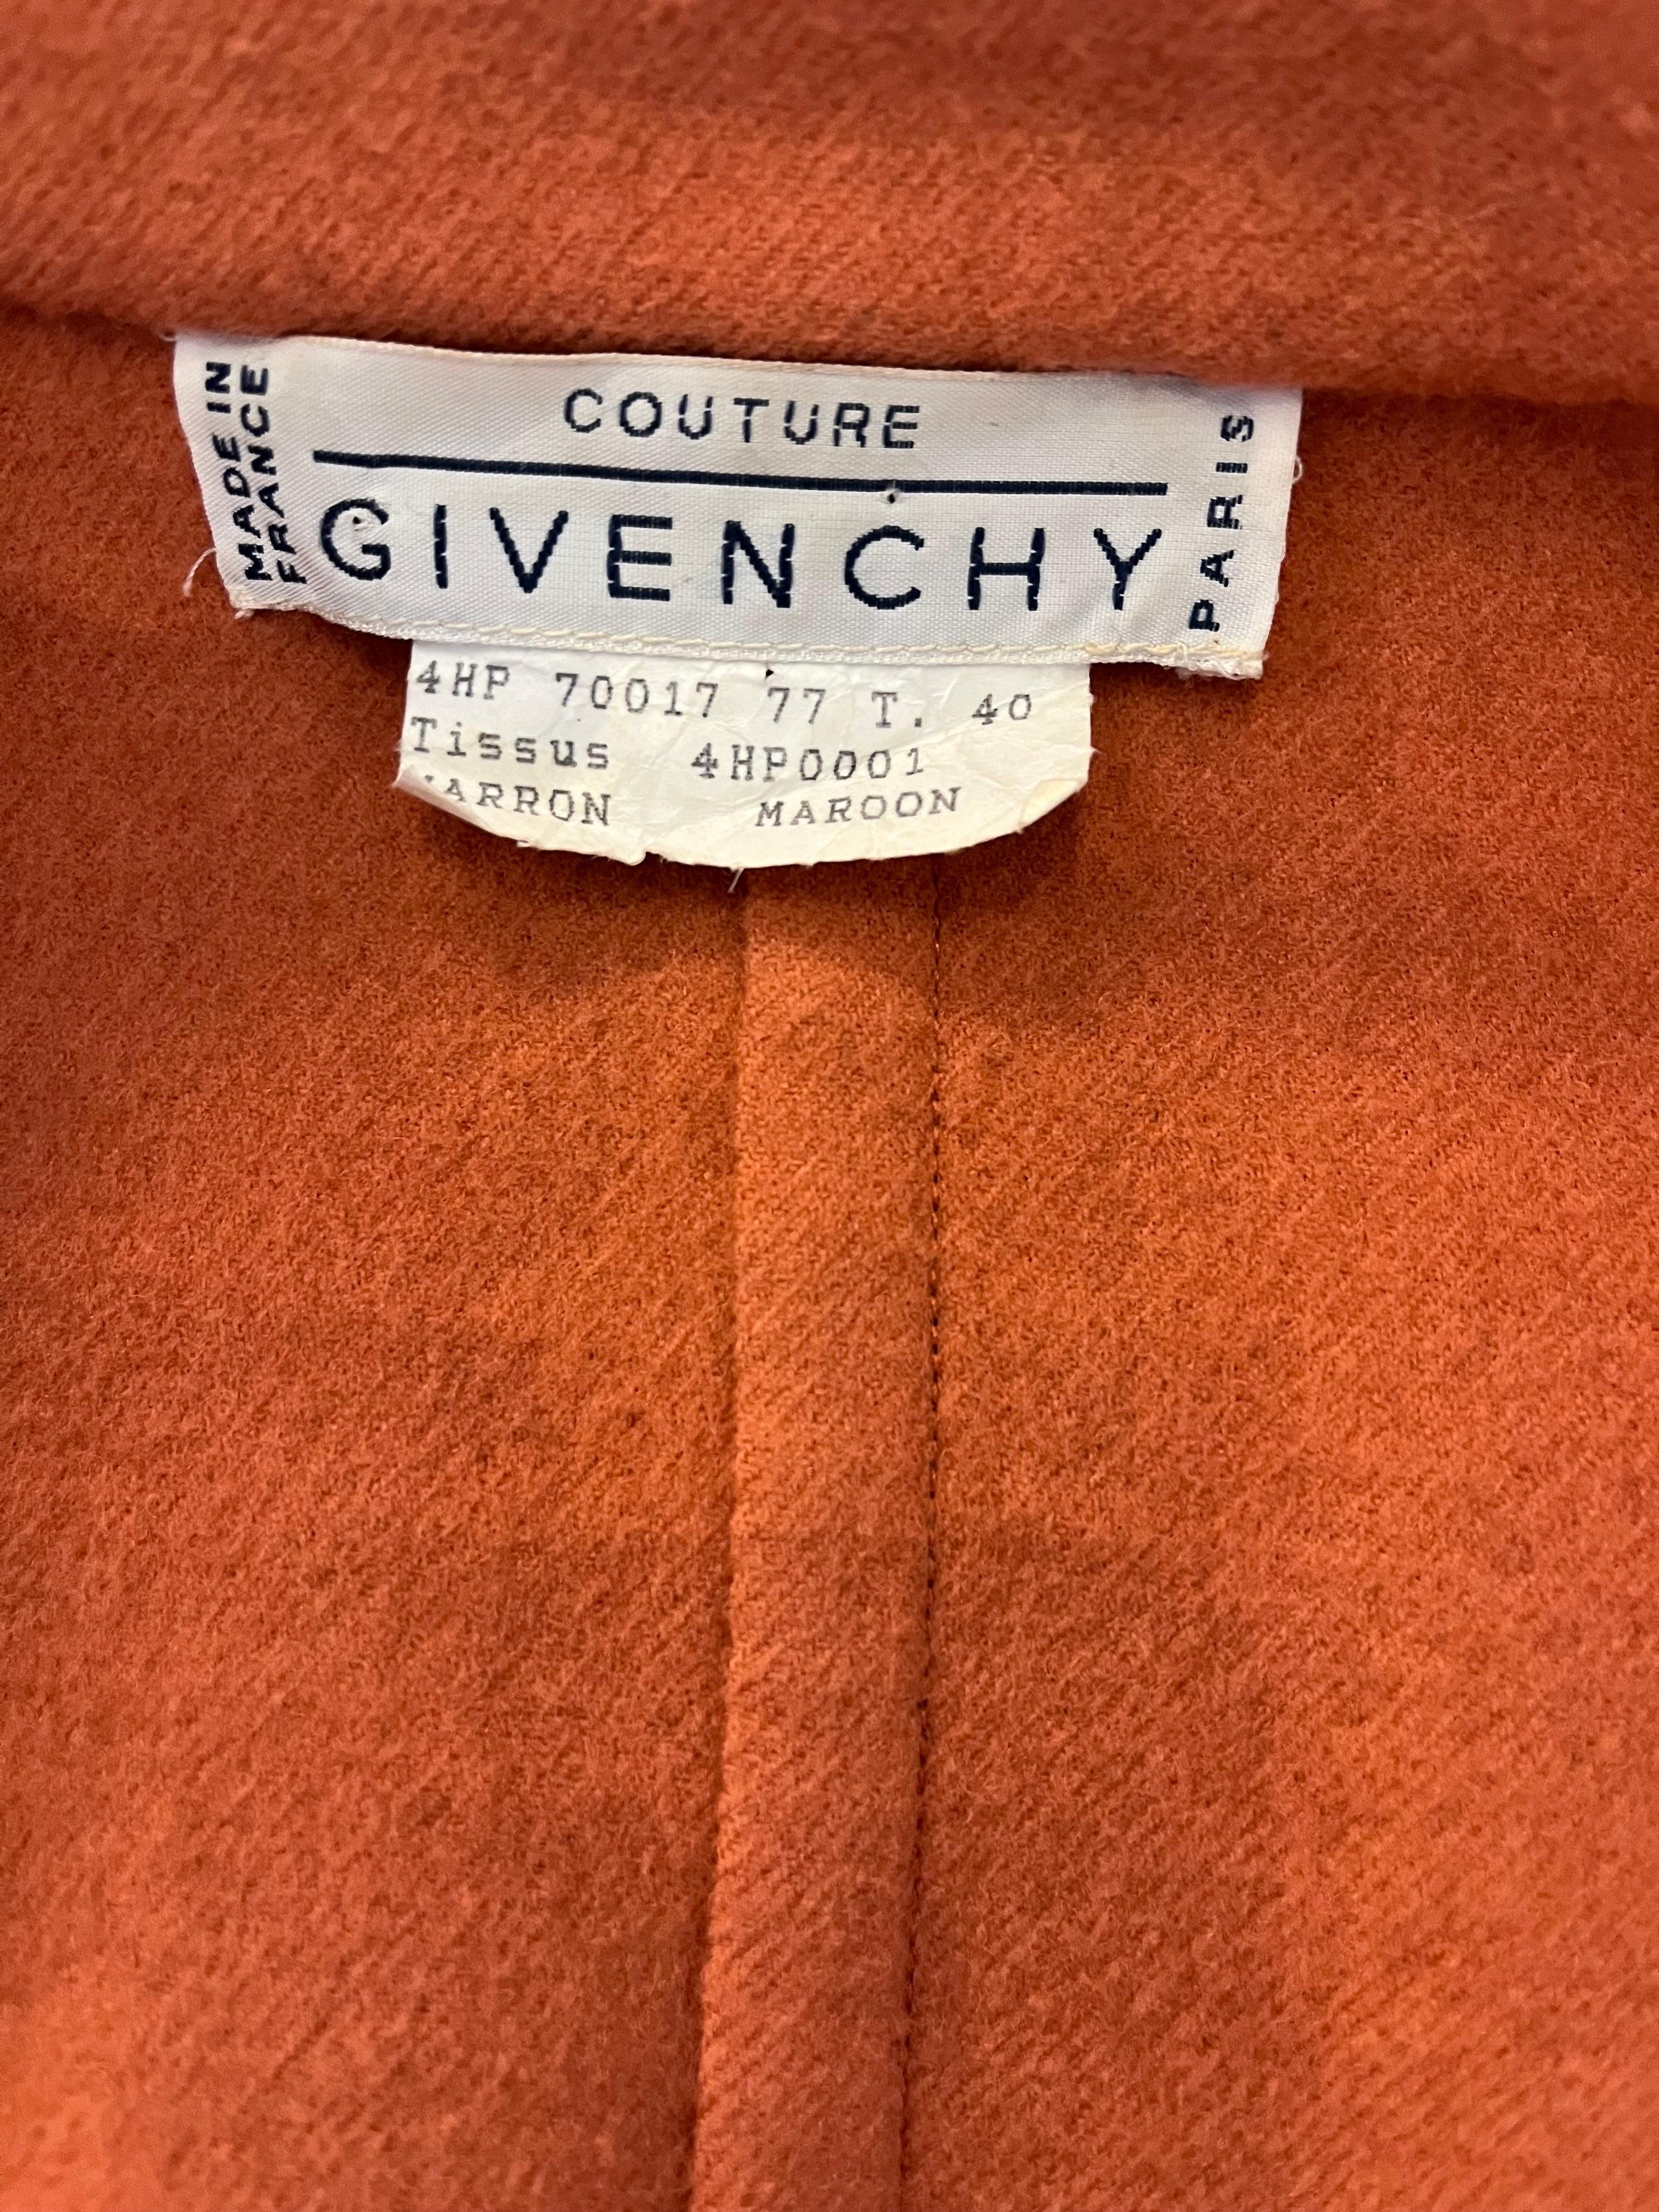 1980er Givenchy Couture Mantel aus Wolle im Angebot 6